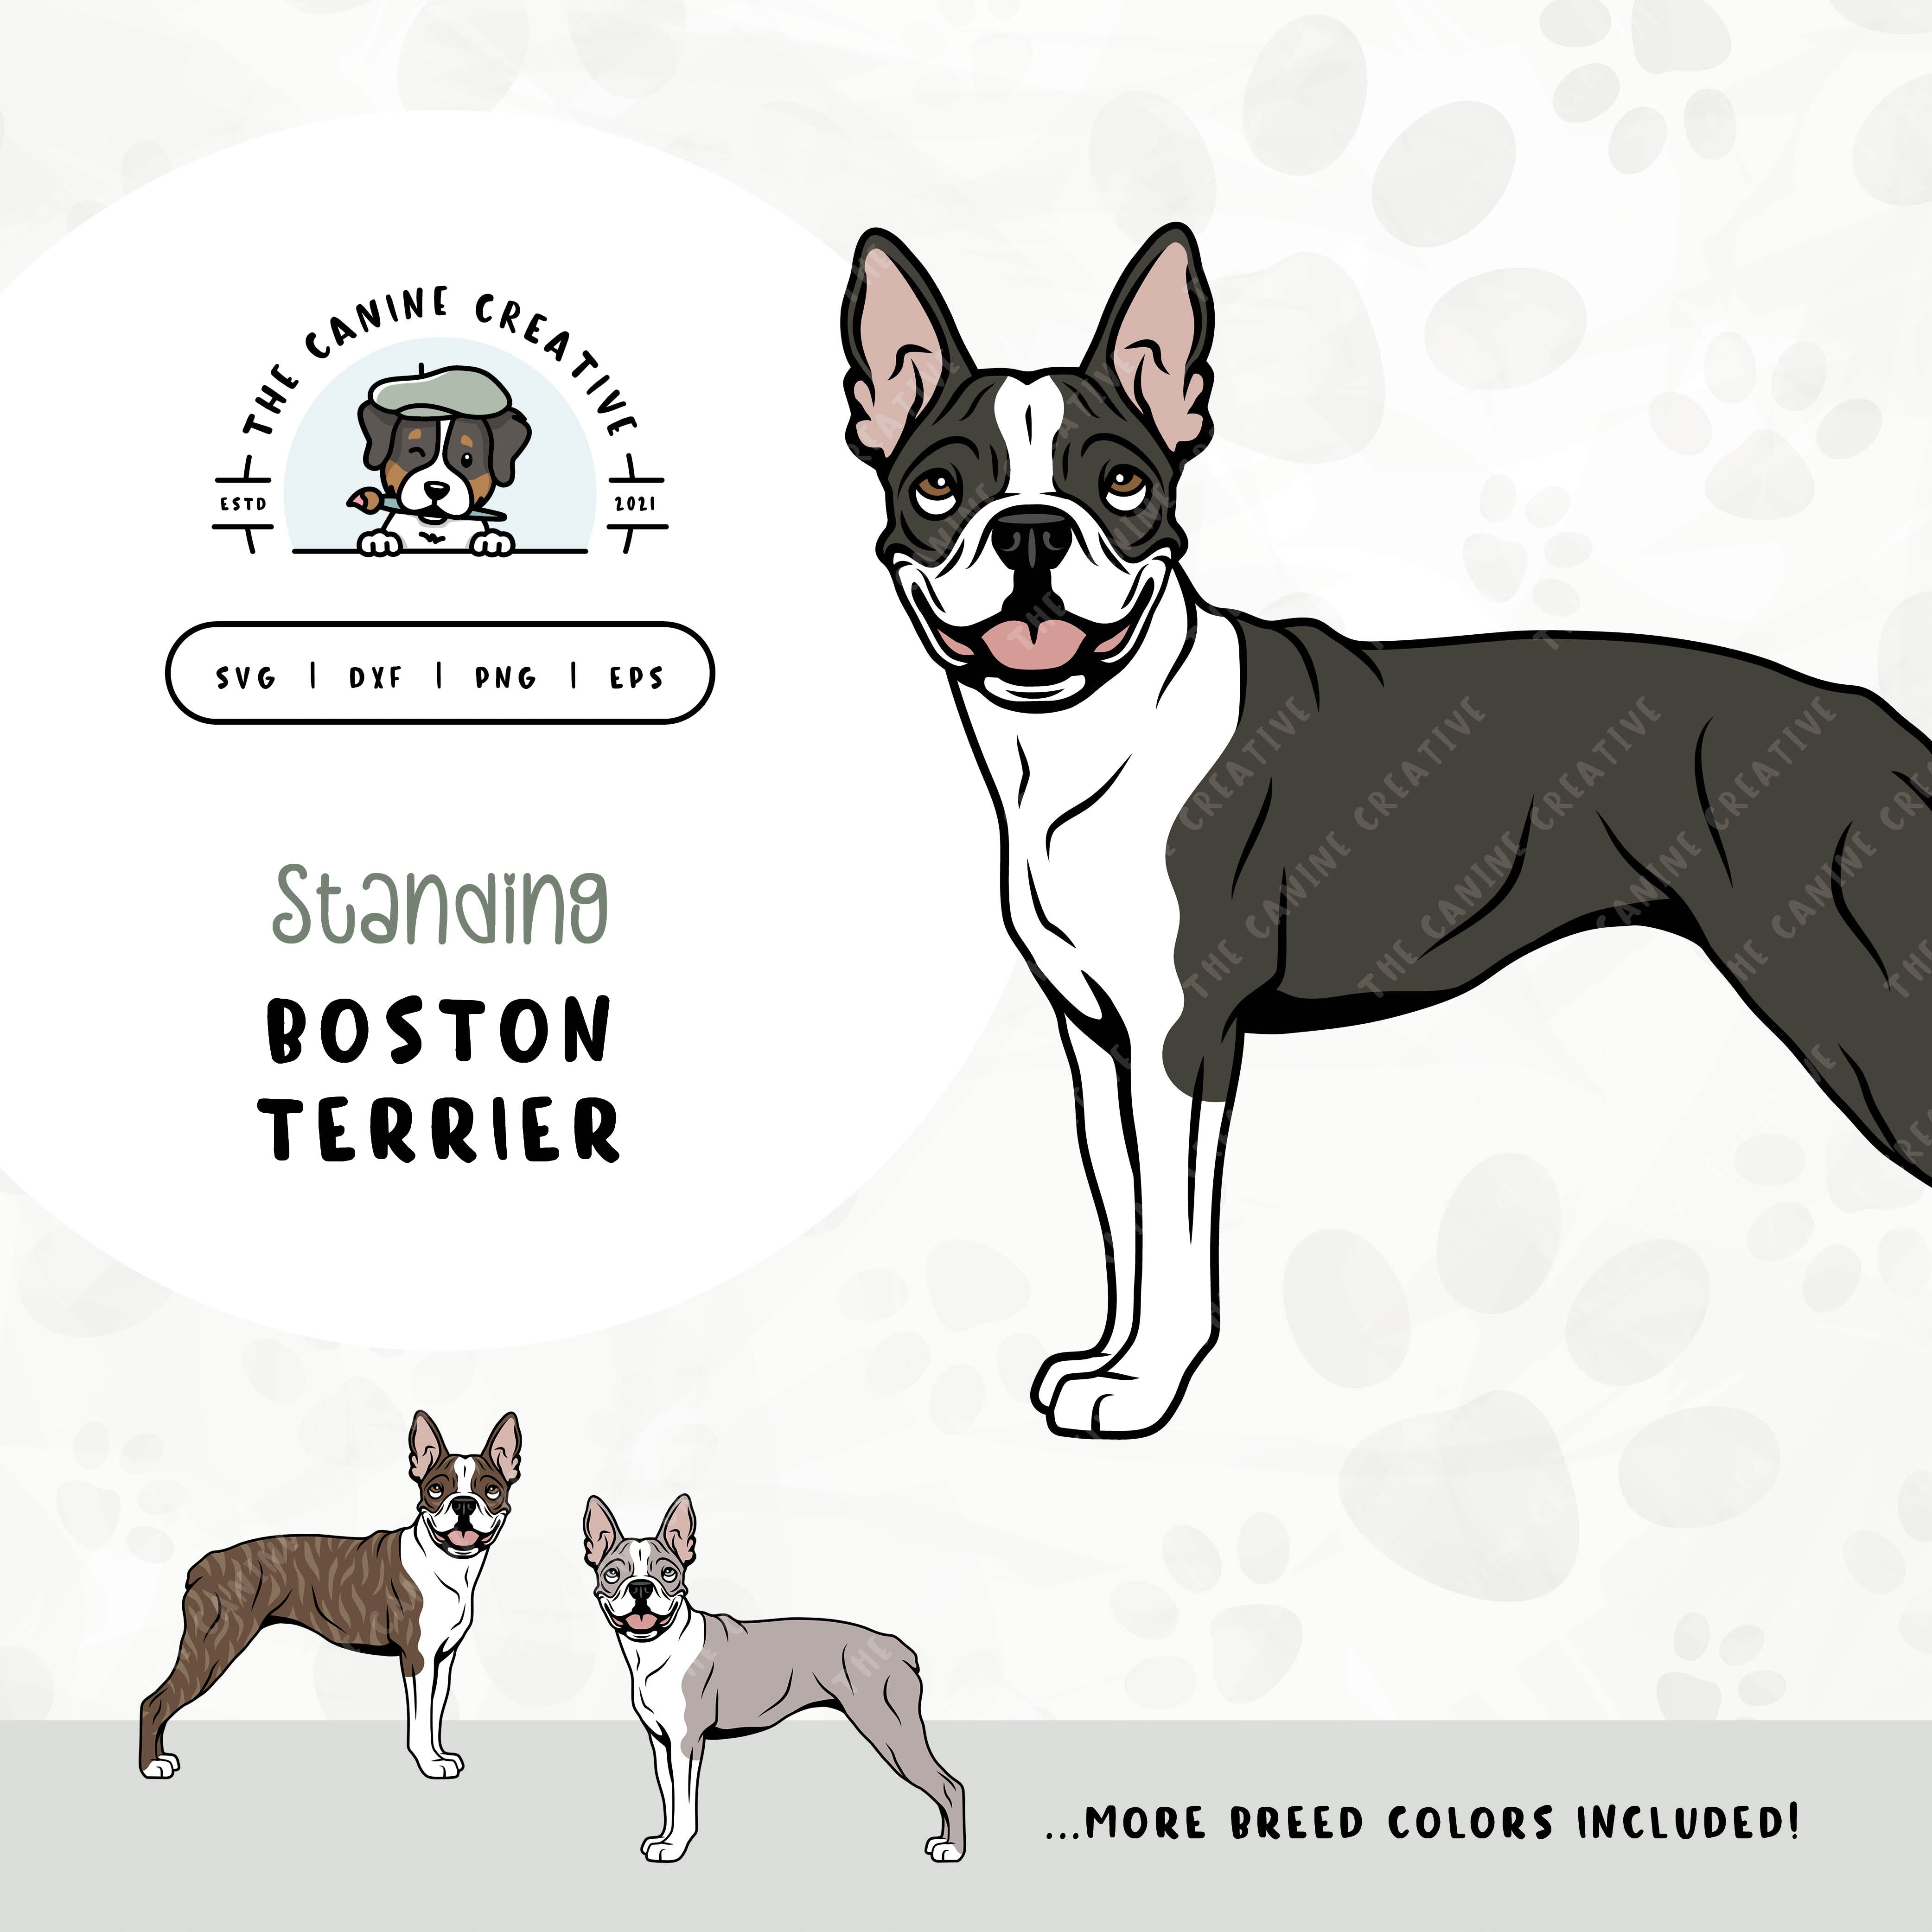 This standing dog design features a Boston Terrier. File formats include: SVG, DXF, PNG, and EPS.